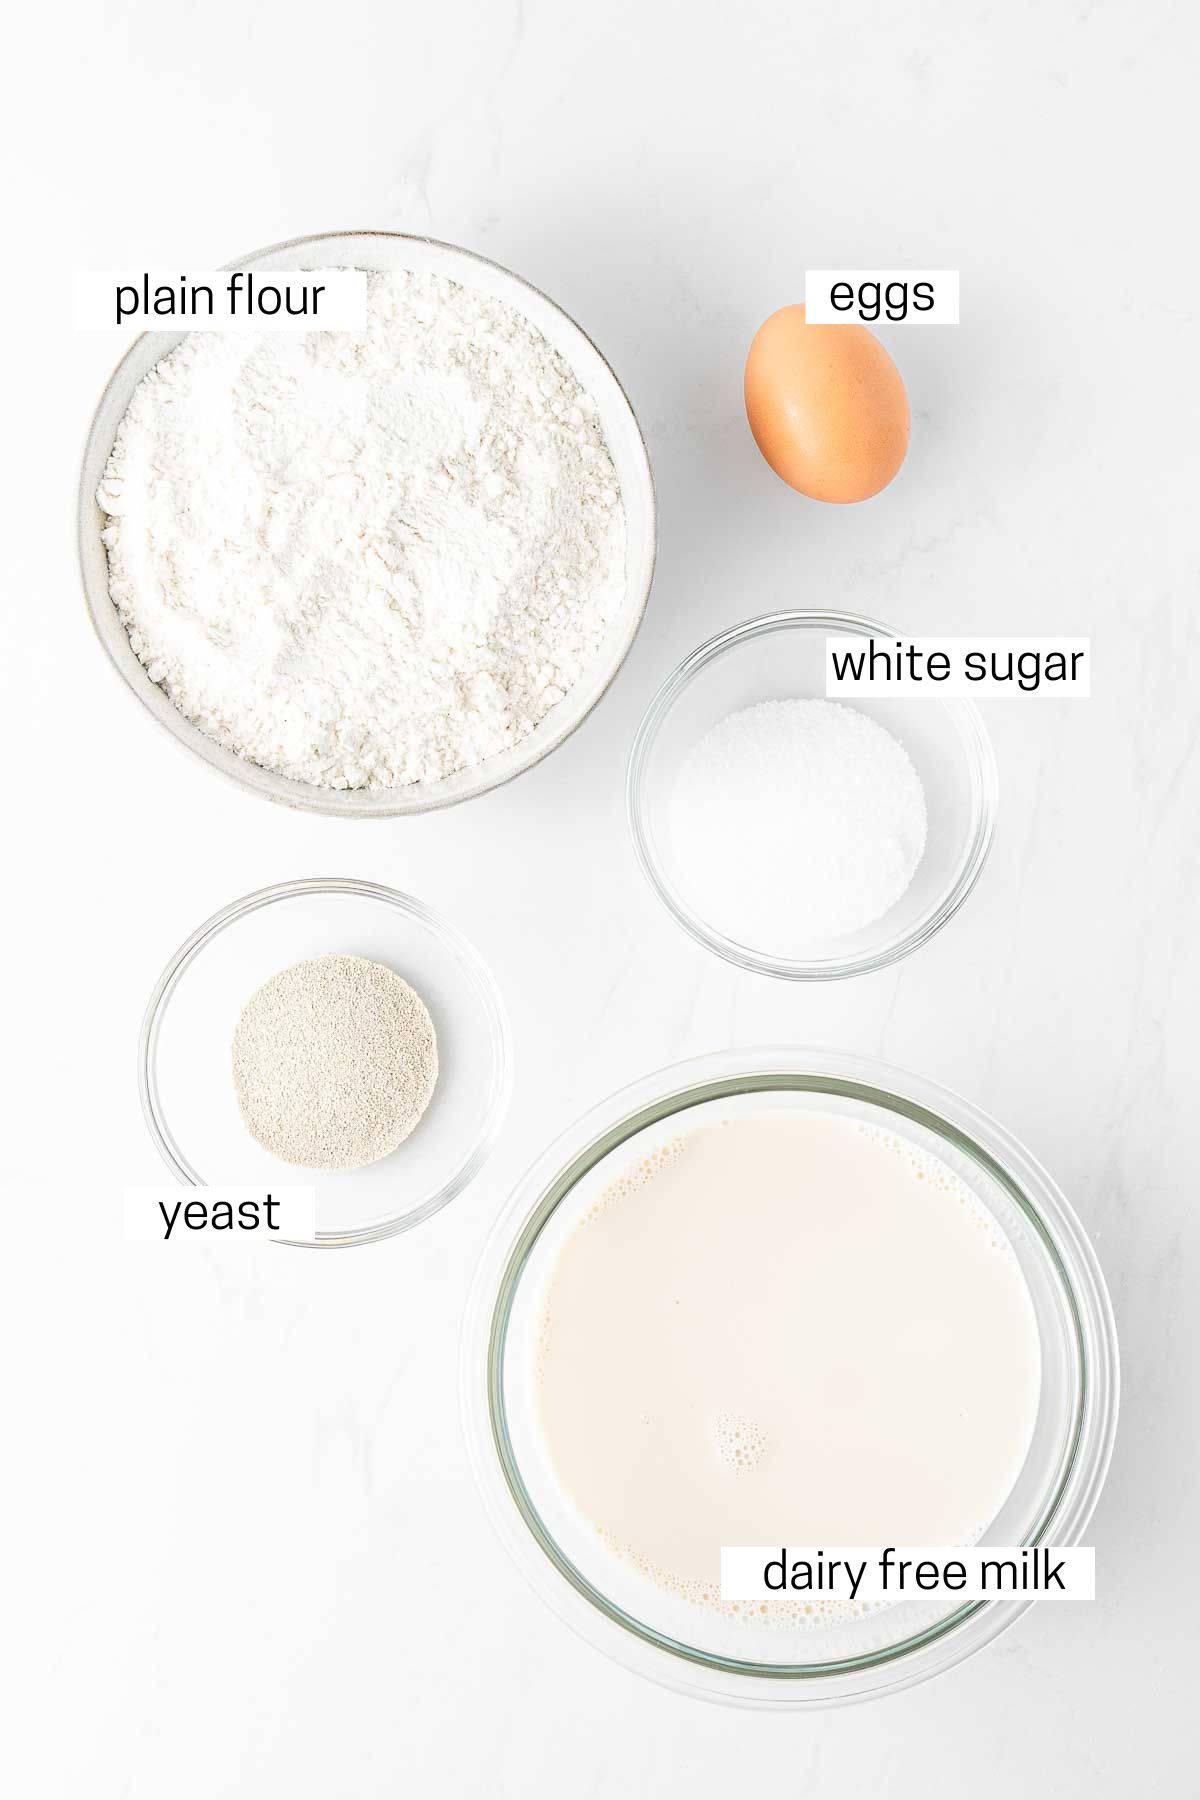 All ingredients needed for poffertjes laid out in bowls.